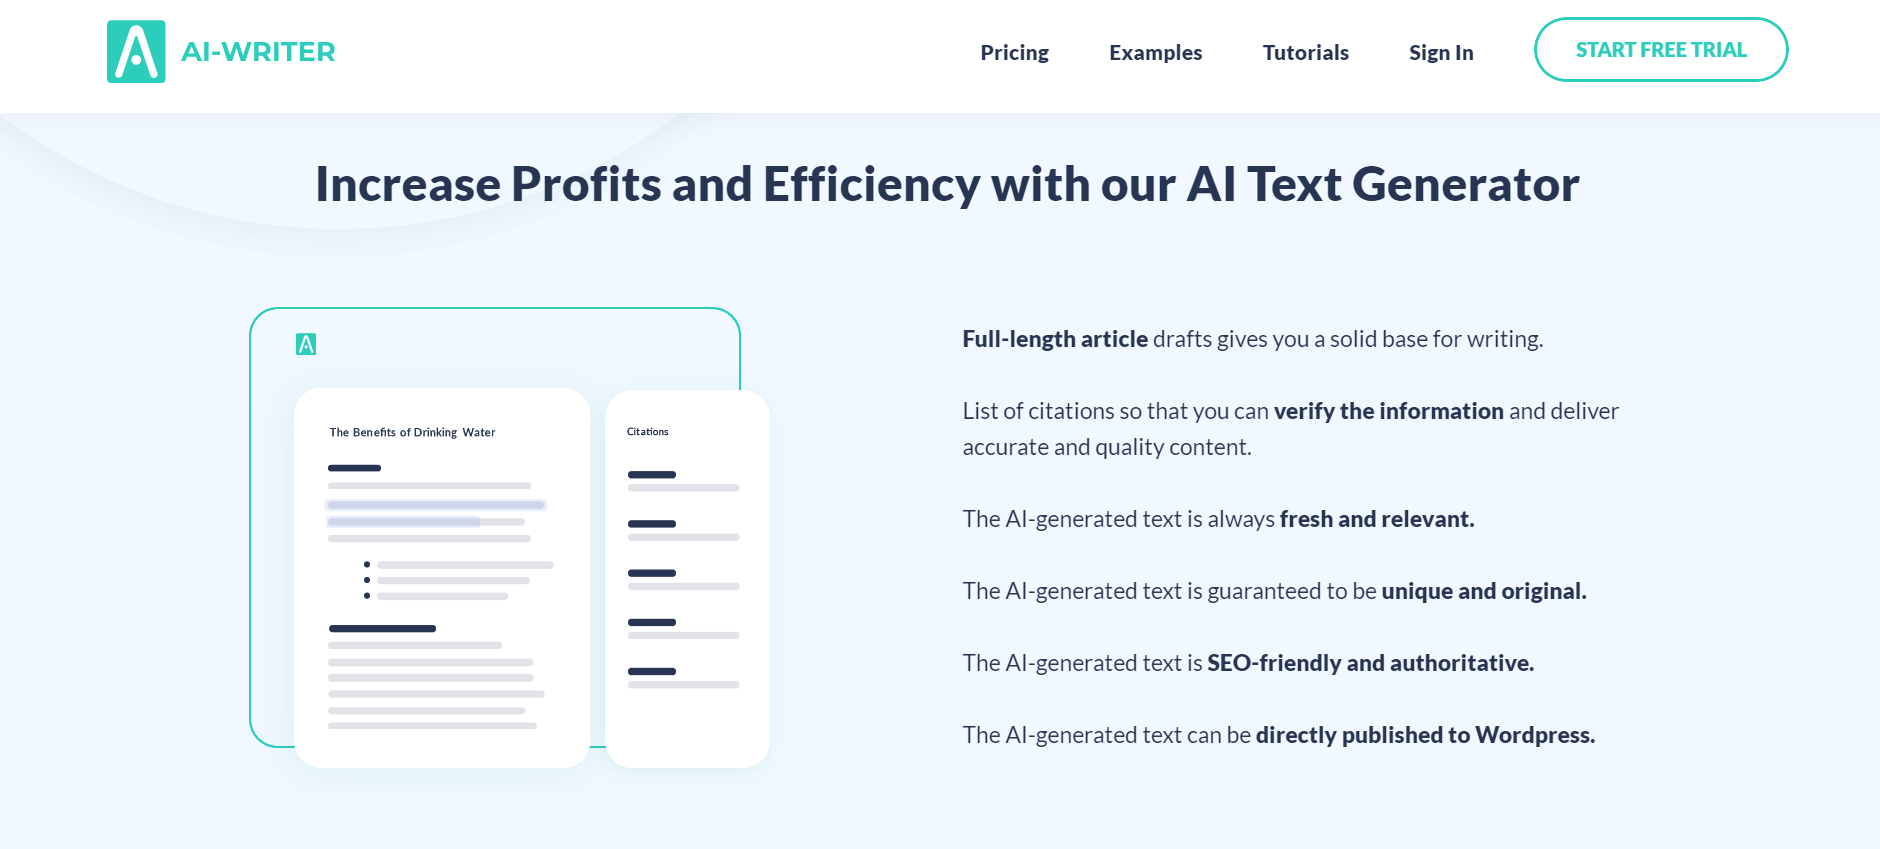 AI Writer Landing Page - "Increase Profits and Efficiency with our AI Text Generator" 